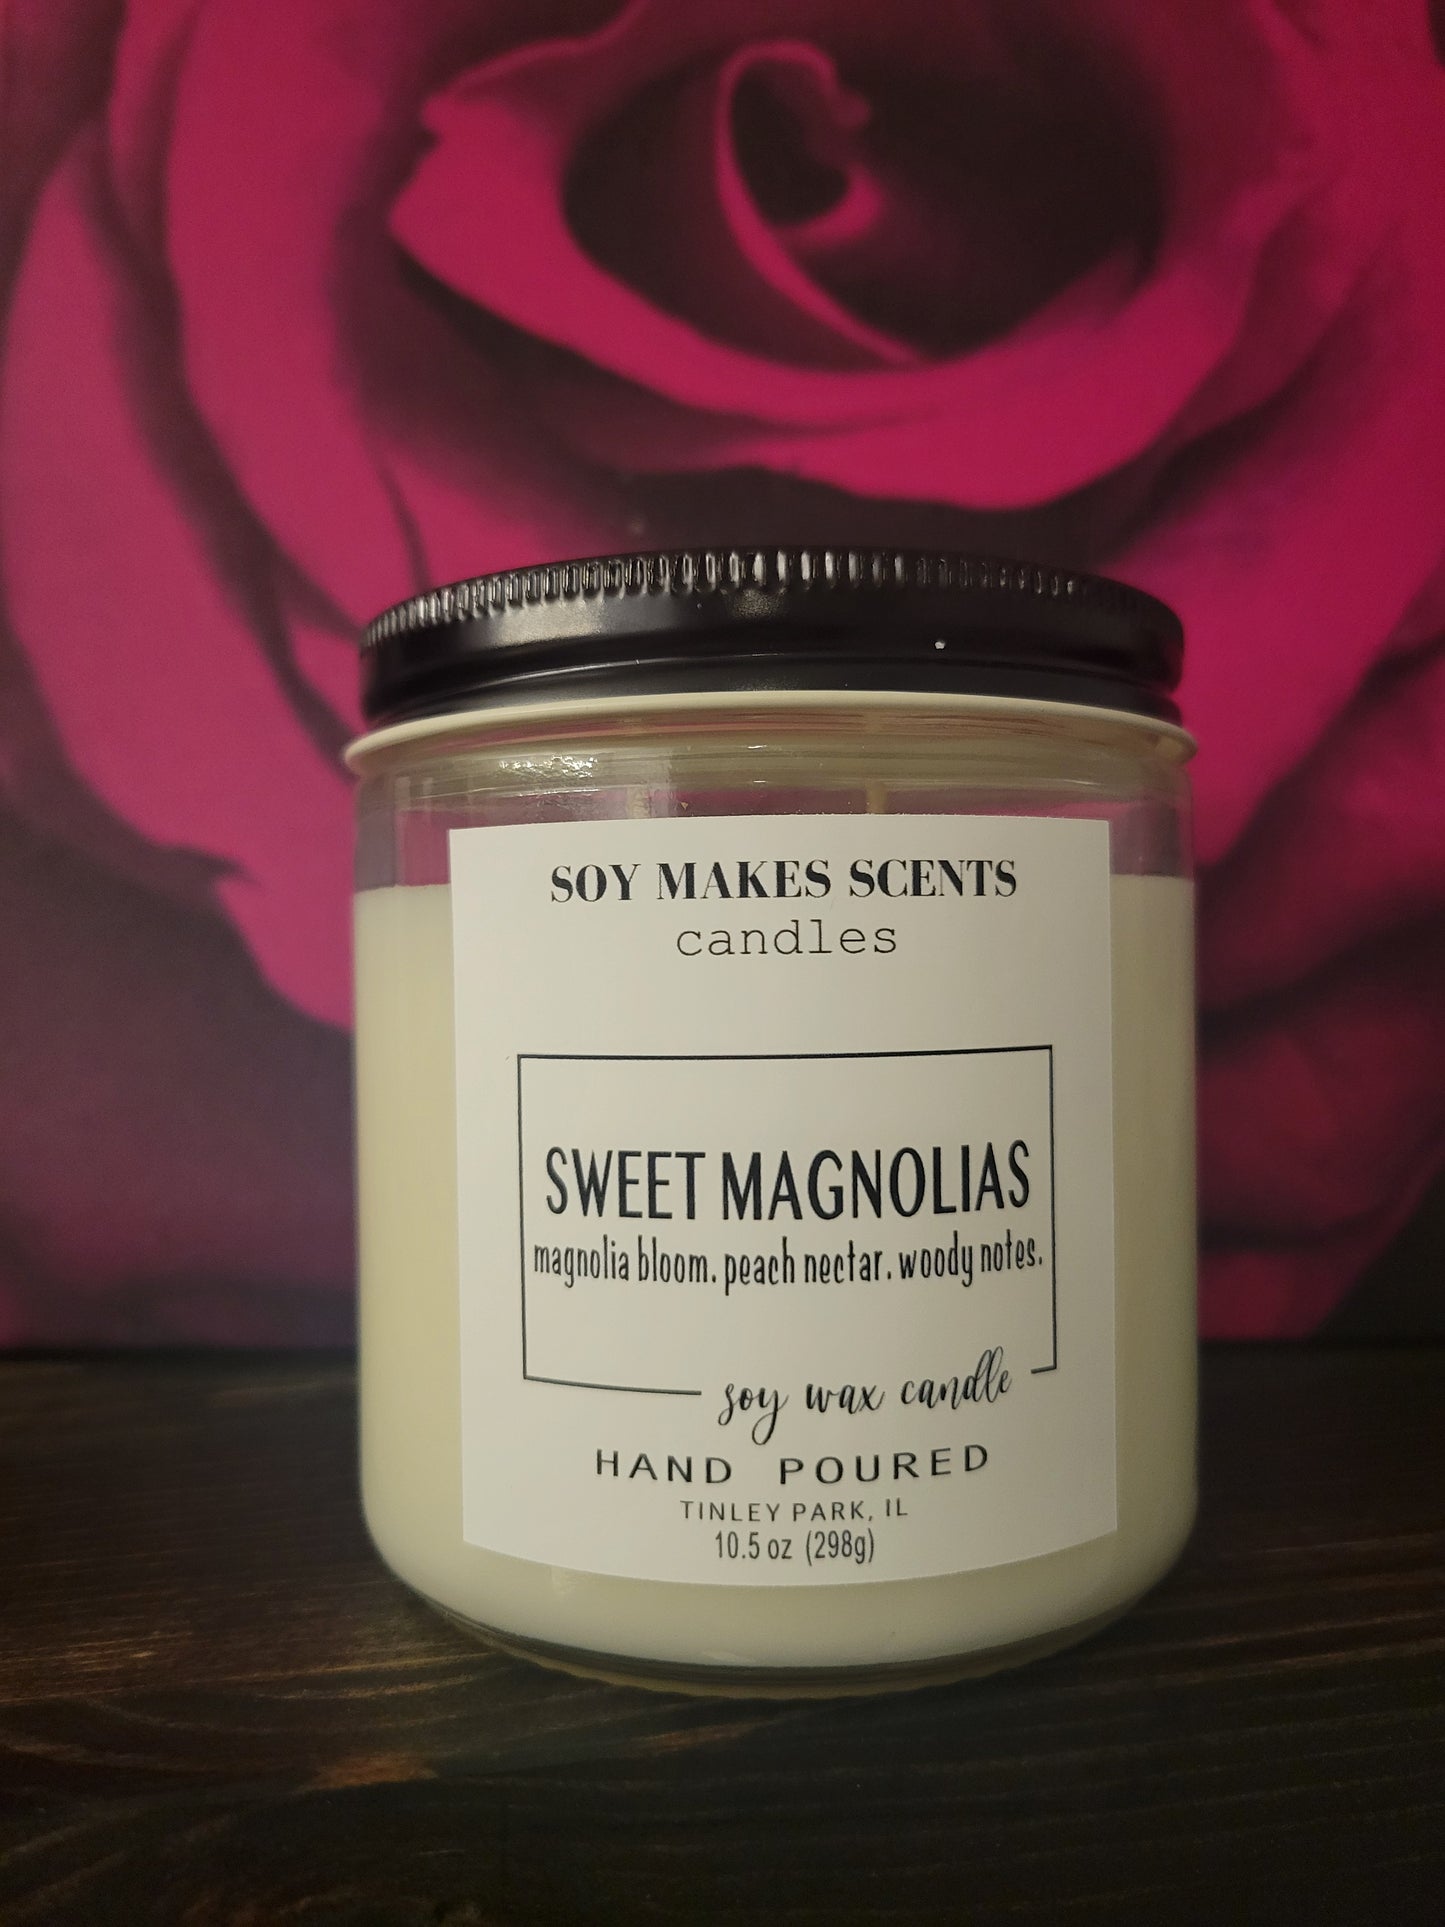 Sweet Magnolias 10.5oz soy wax candle